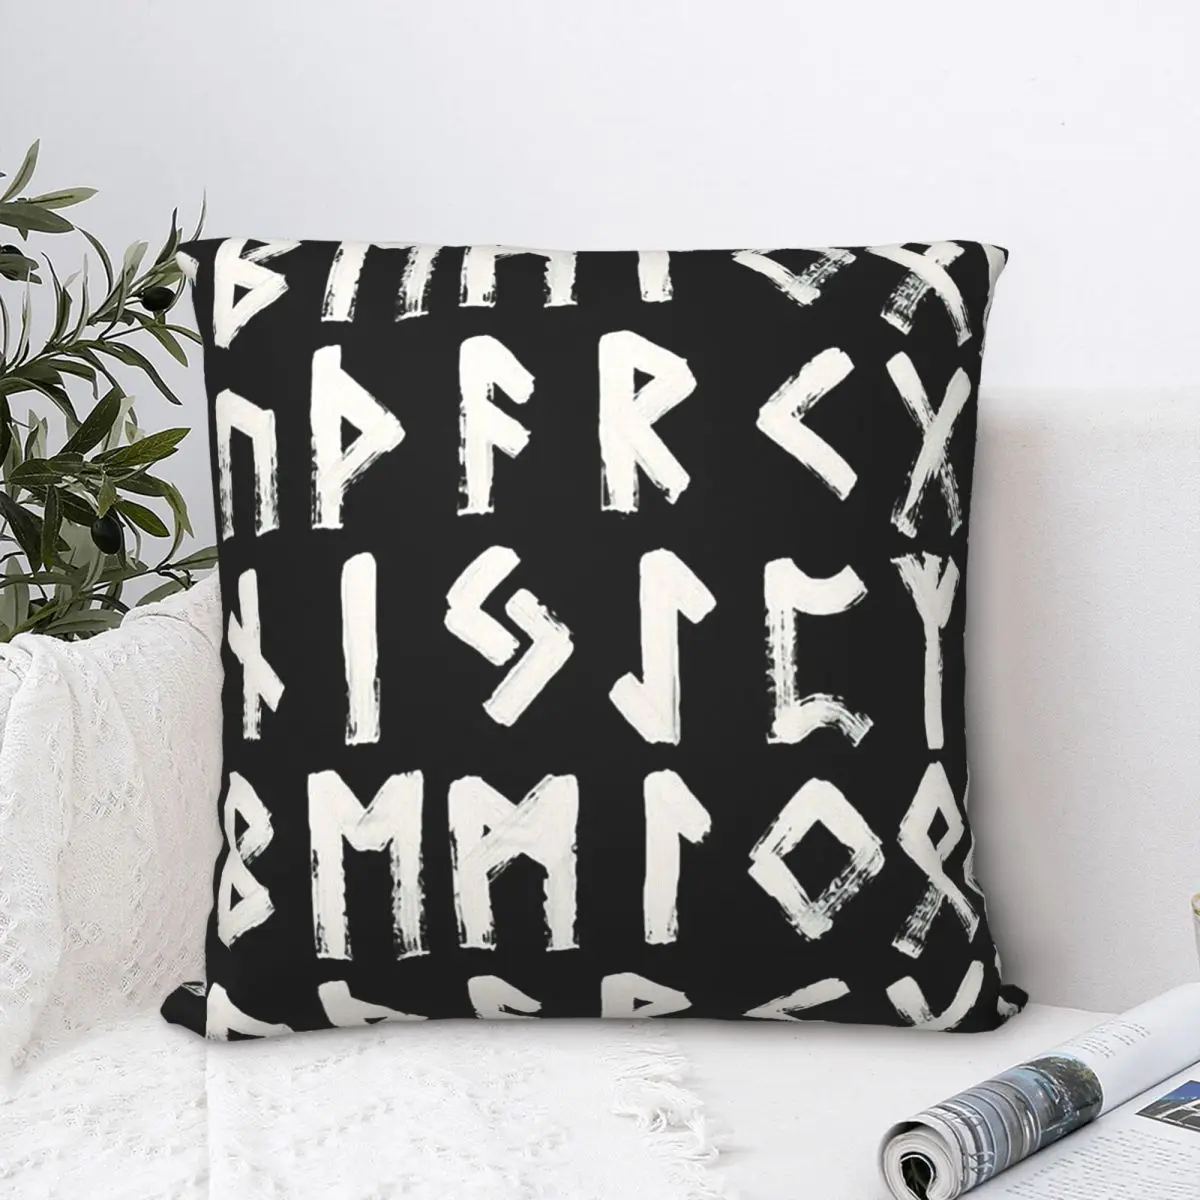 

Runes Elder Futhark Throw Pillow Case Viking Norse Mythology Short Plus Cushion Covers For Home Sofa Chair Decorative Backpack